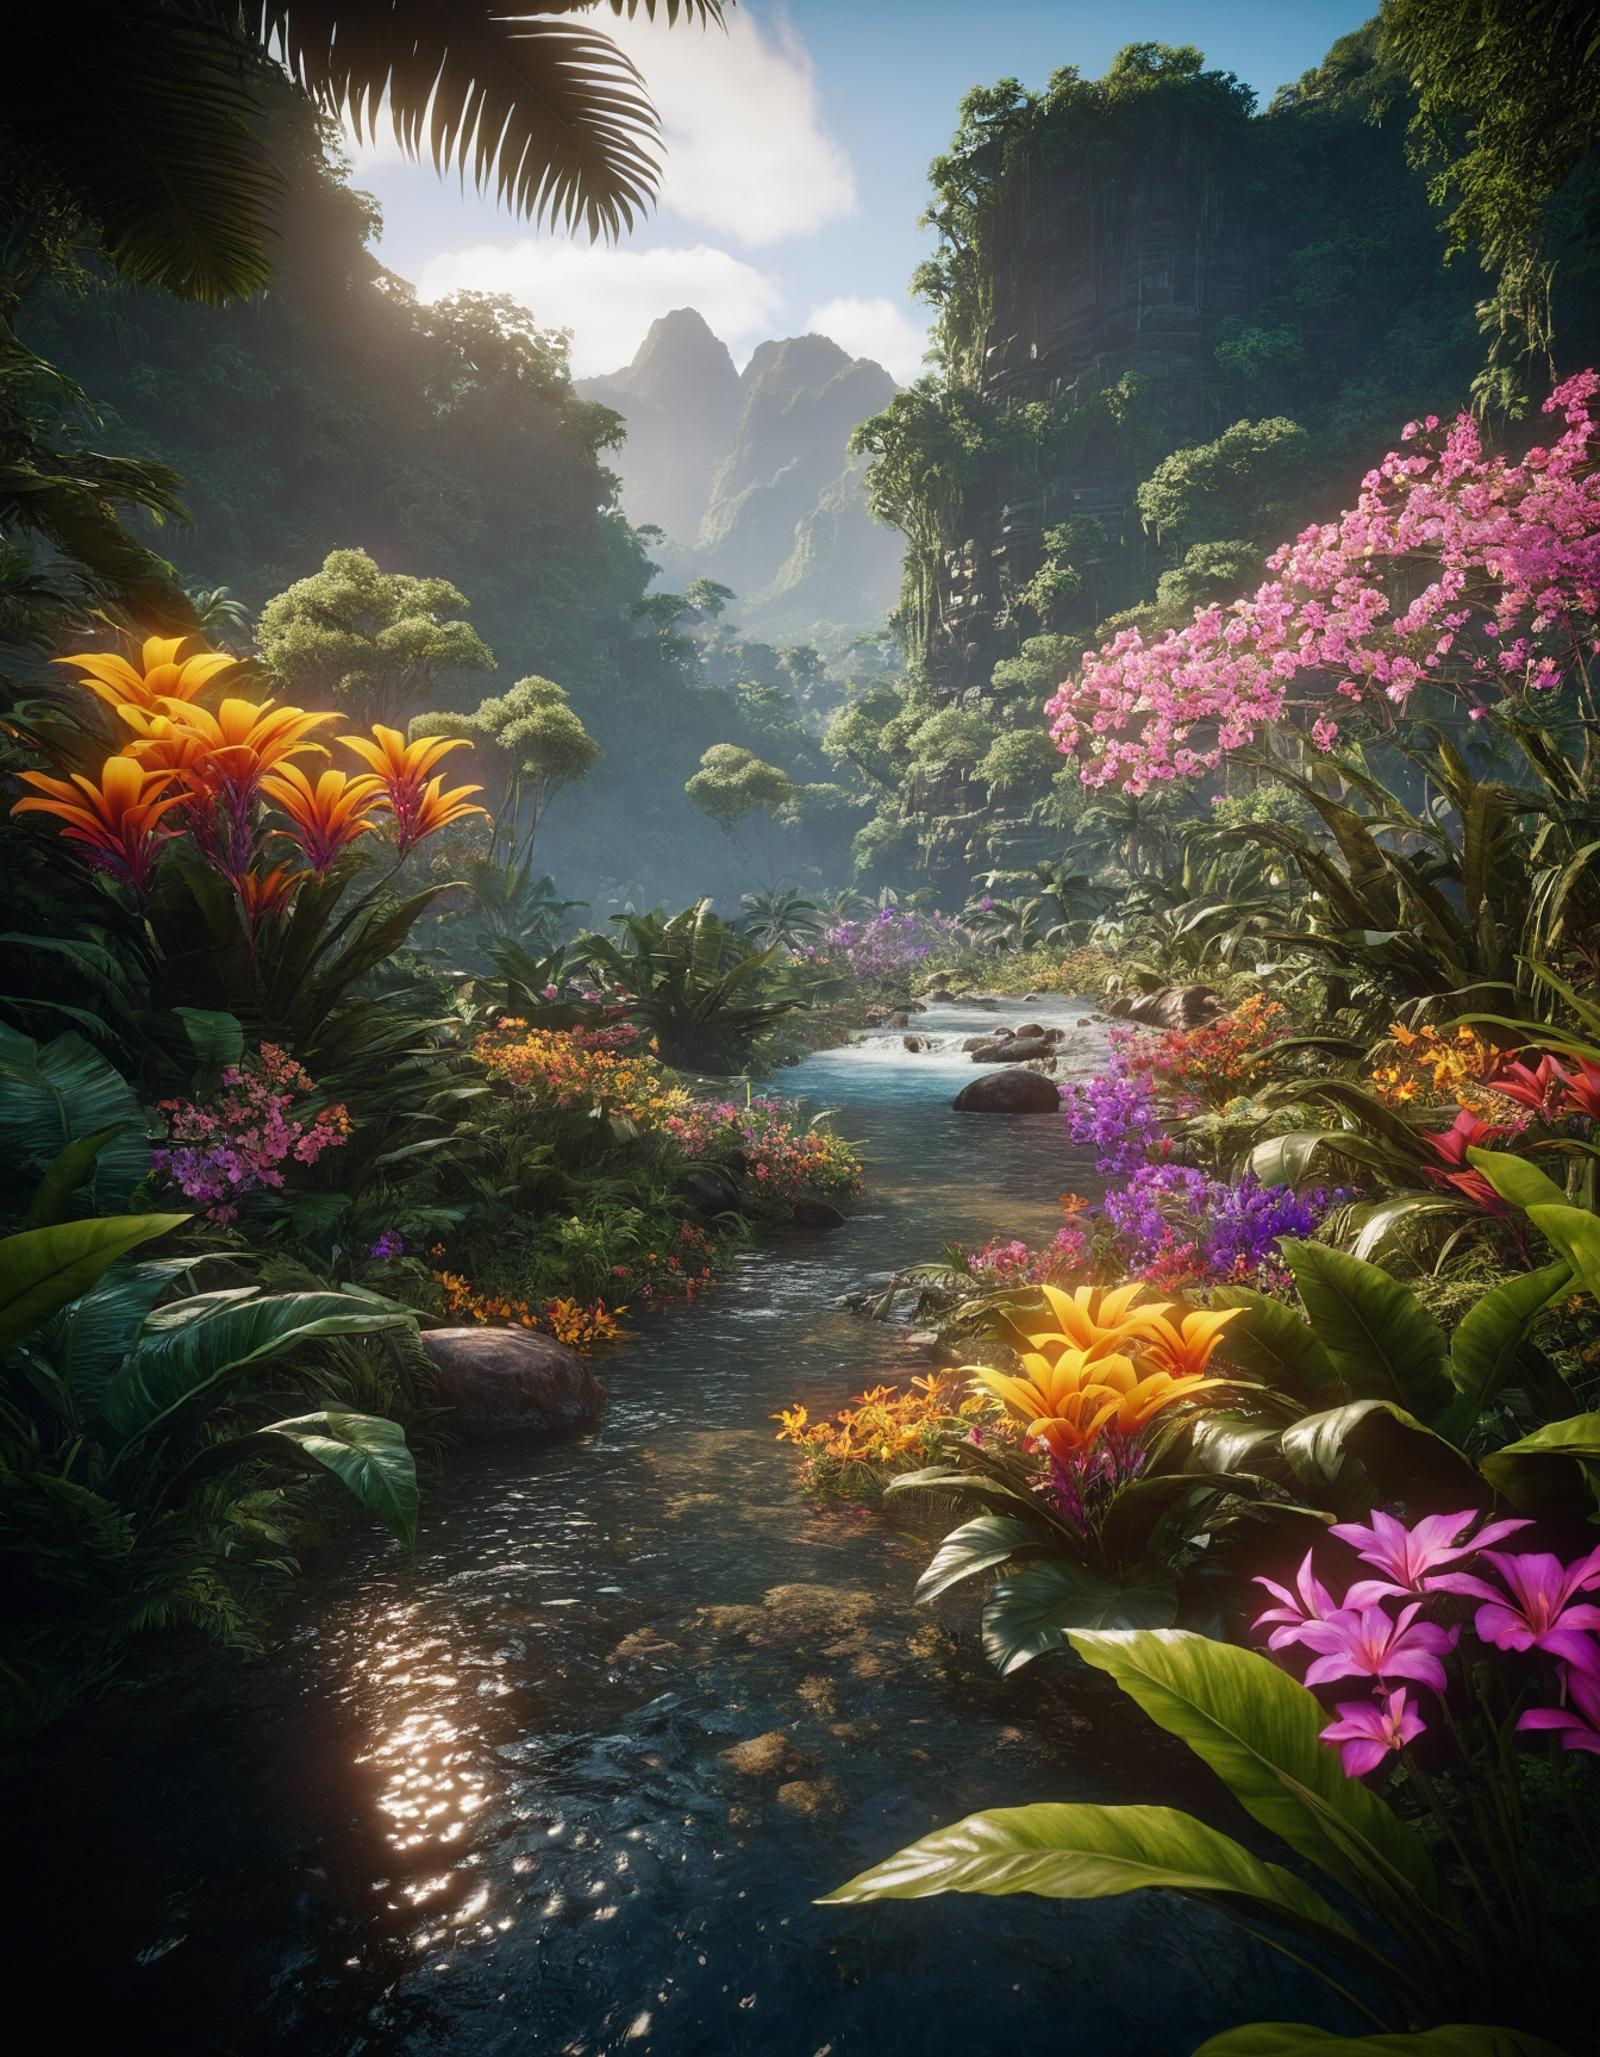 Tropical Flowers and Waterfall in a Lush Forest